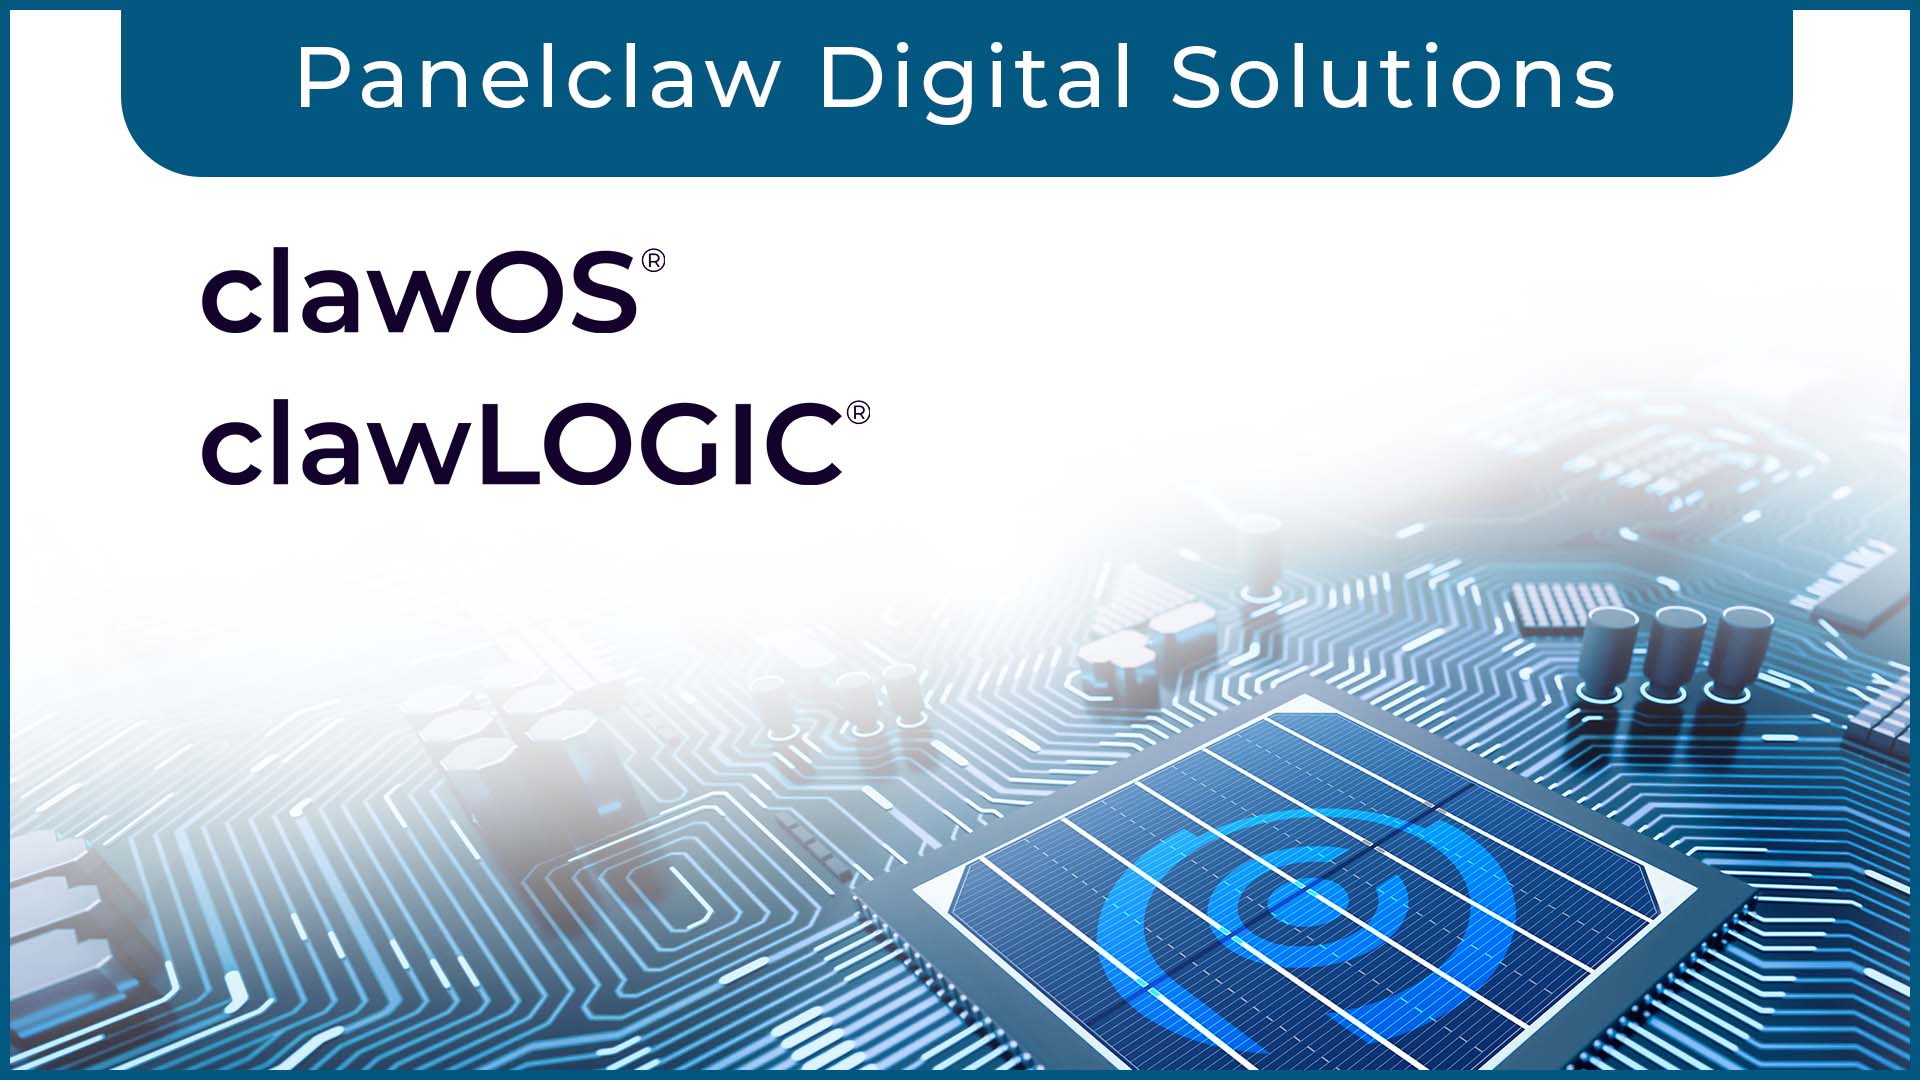 Panelclaw Digital Solutions